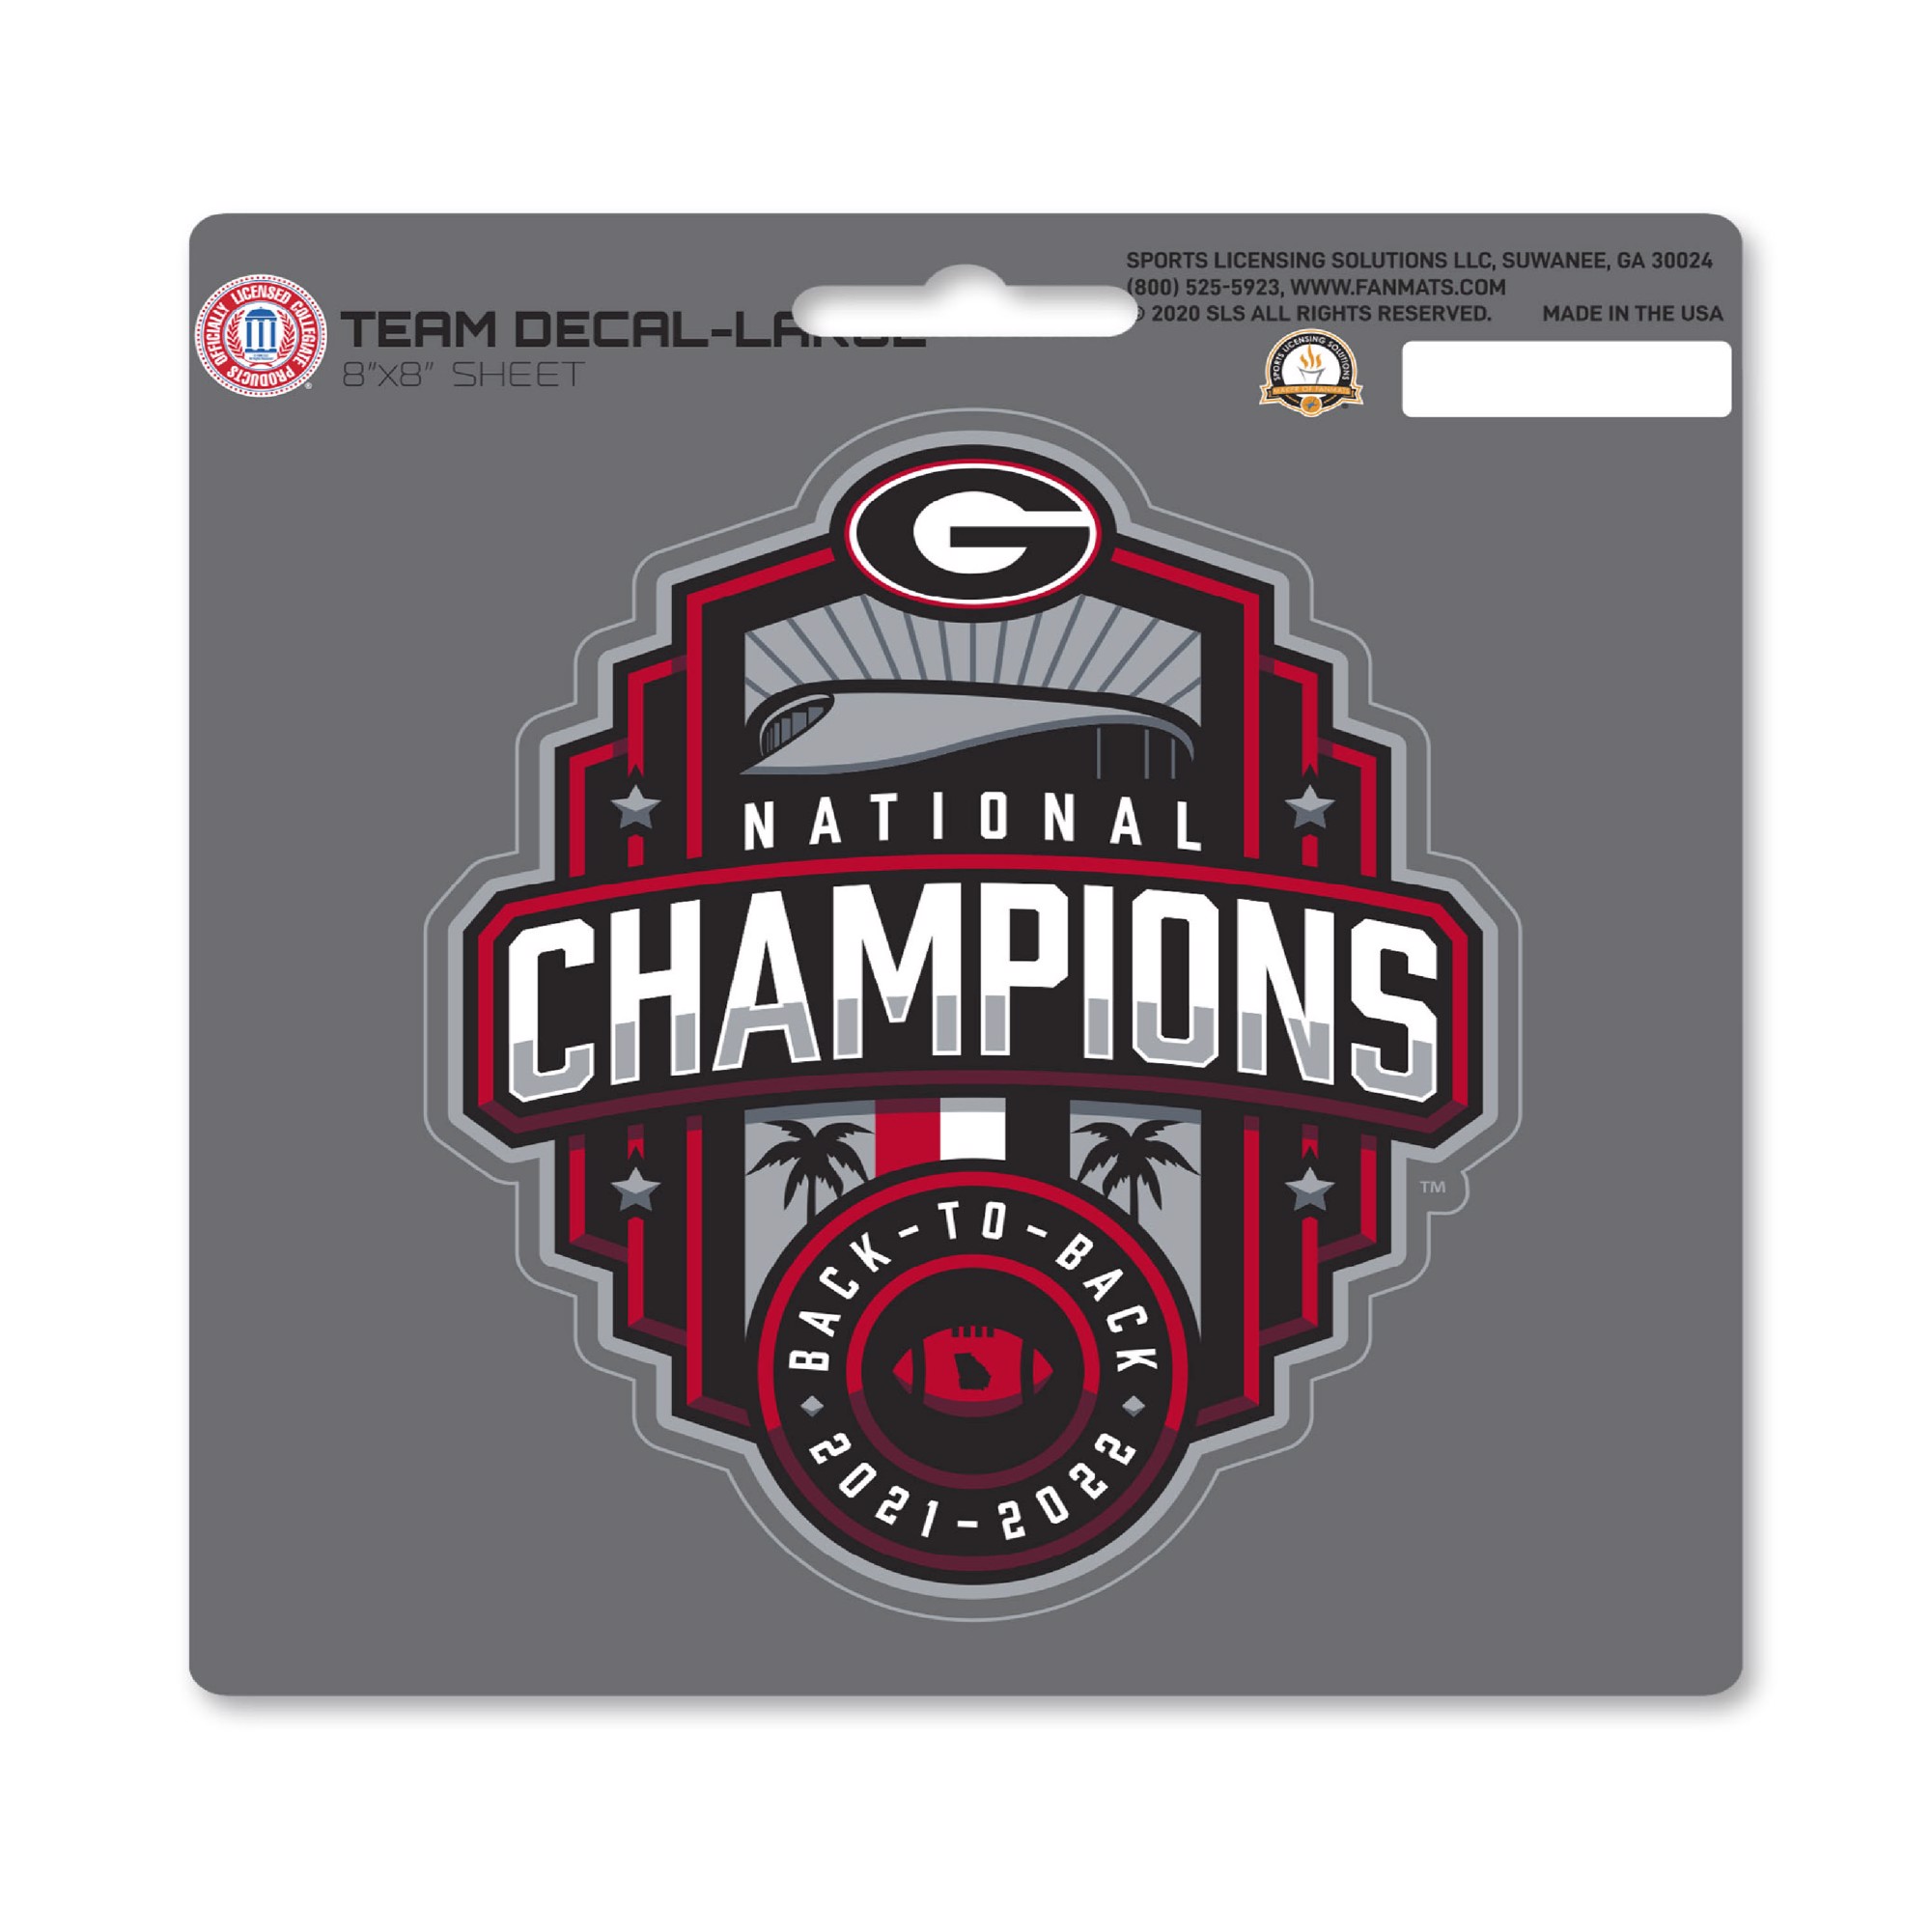 FANMATS Tampa Bay Buccaneers Super Bowl LV Champions Large Decal